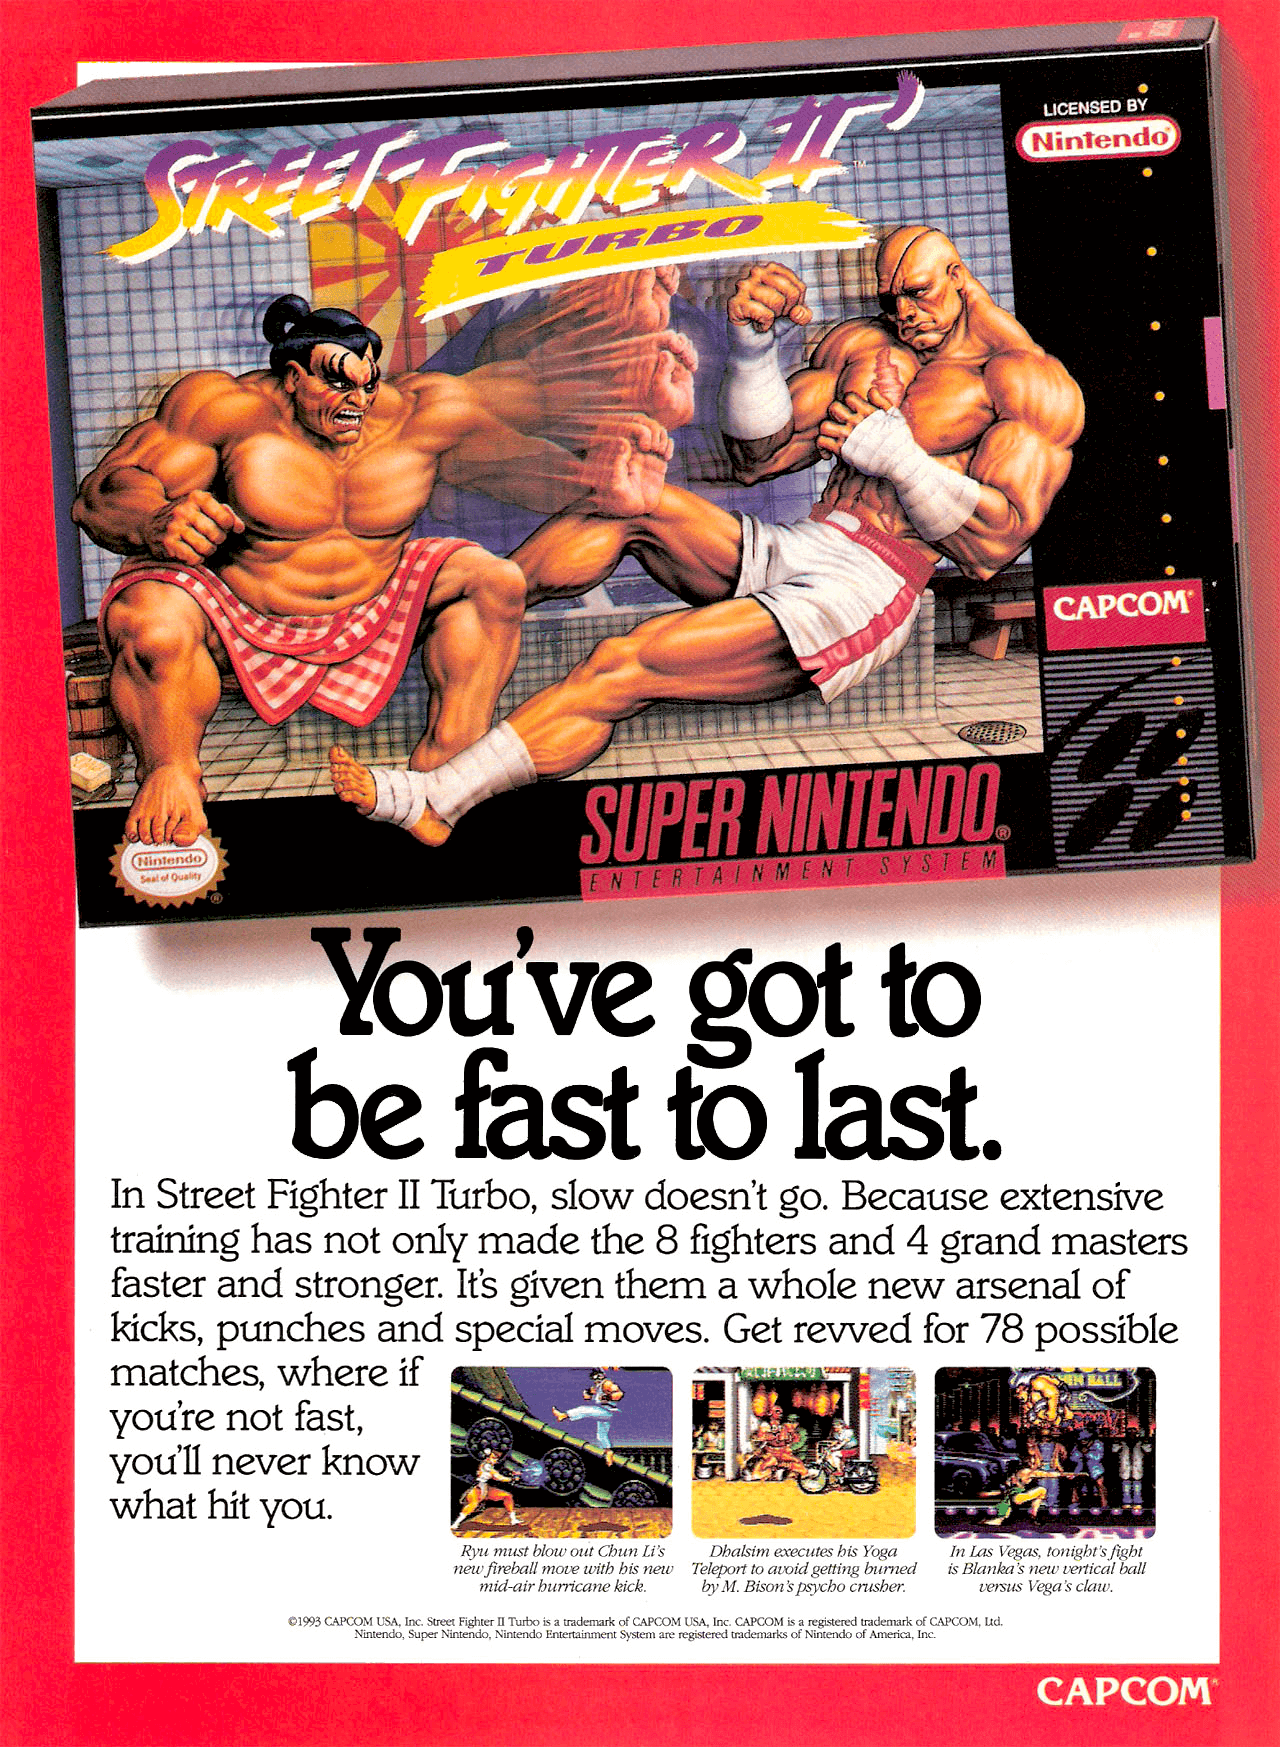 Image For Post | Street Fighter II Turbo: Hyper Fighting[a] is a competitive fighting game released for the arcade by Capcom in 1992. It is the third game in the Street Fighter II sub-series of Street Fighter games following Street Fighter II: Champion Edition. Released less than a year after the previous installment, Hyper Fighting introduced a faster playing speed and new special moves for certain characters, as well as further refinement to the character balance.

Hyper Fighting is the final arcade game in the Street Fighter II series to use the original CP System hardware. It was distributed as an upgrade kit designed to be installed into Champion Edition printed circuit boards. The next game in the series, Super Street Fighter II, uses the CP System's successor, the CP System II.

Choose from twelve street fighters from around the world, skilled in a variety of martial arts -- for instance, a character named E.Honda is a sumo wrestler from Japan, while Ken is a master of Tae Kwon Do from the United States. Journey to different countries to defeat other fighters, eventually leading up to a battle with evil man M.Bison. Besides the standard punches and kicks, each character can also execute special moves, such as energy projectiles or lightning-fast kicks, for more damage or to create a chain of hit combos.